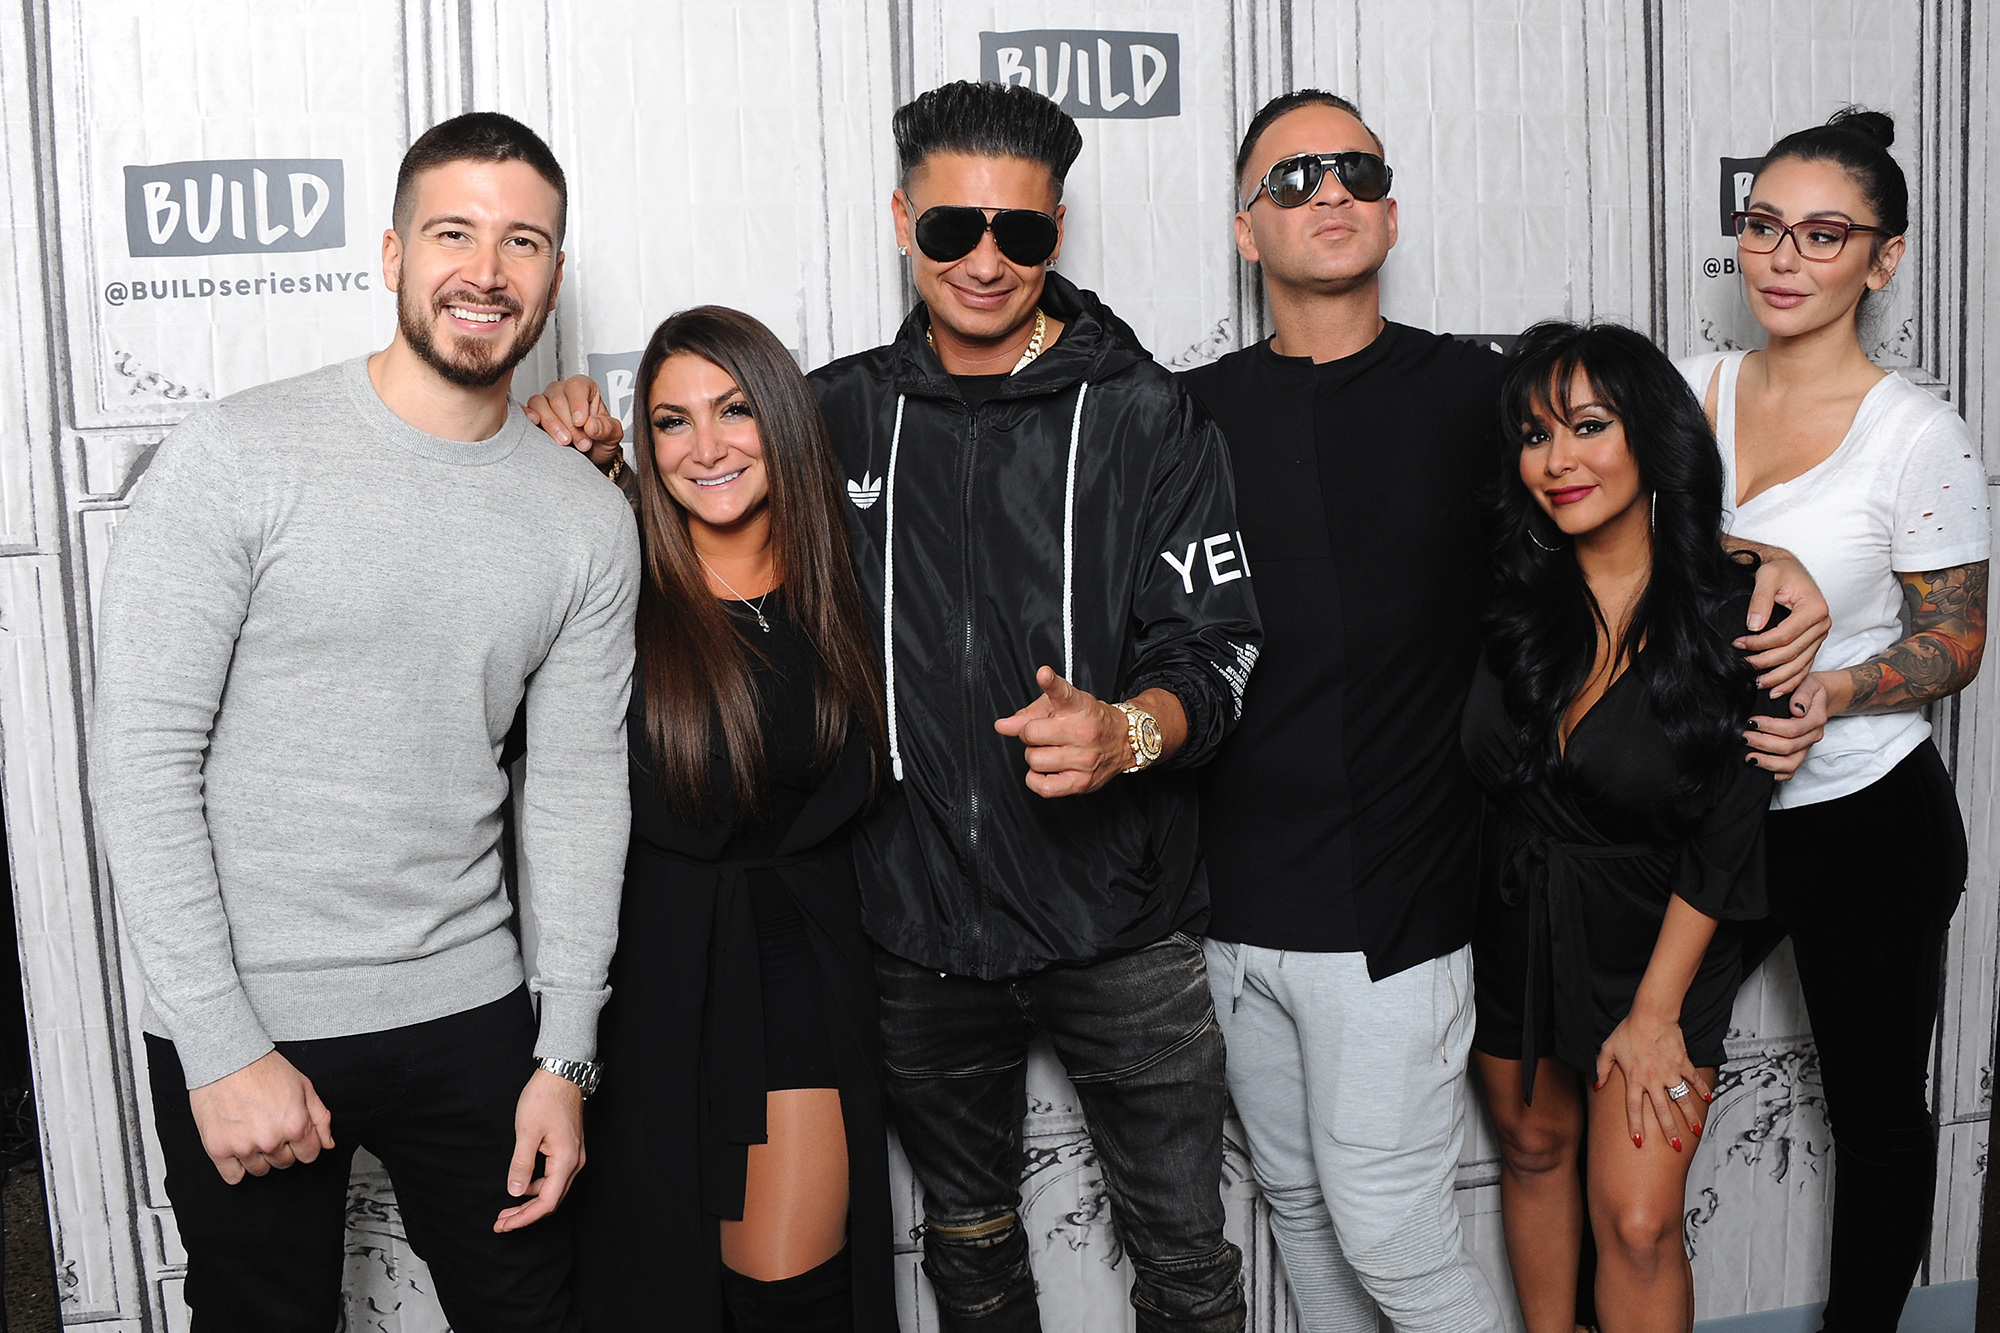 Jersey Shore cast posing together, known for their unique slang language